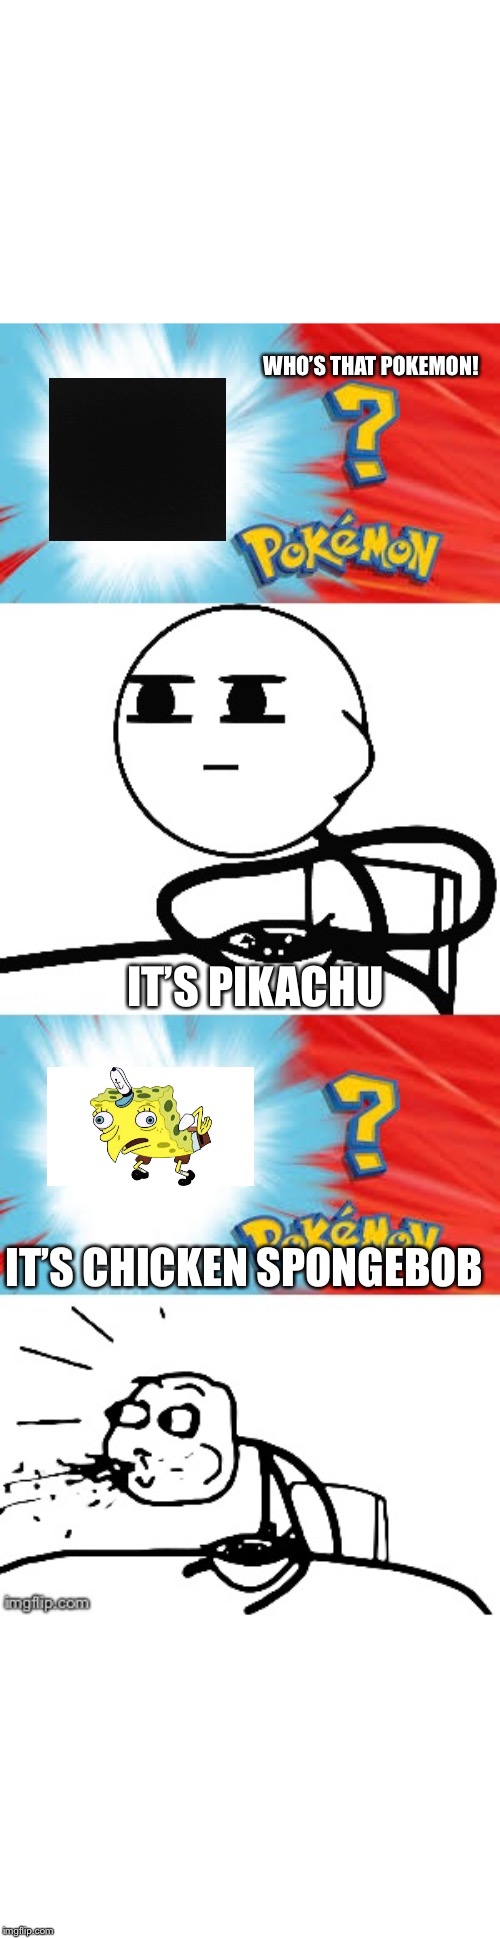 Who's that Pokémon? | WHO’S THAT POKEMON! IT’S PIKACHU; IT’S CHICKEN SPONGEBOB | image tagged in who's that pokmon,memes,chicken spongebob,spongebob mock | made w/ Imgflip meme maker